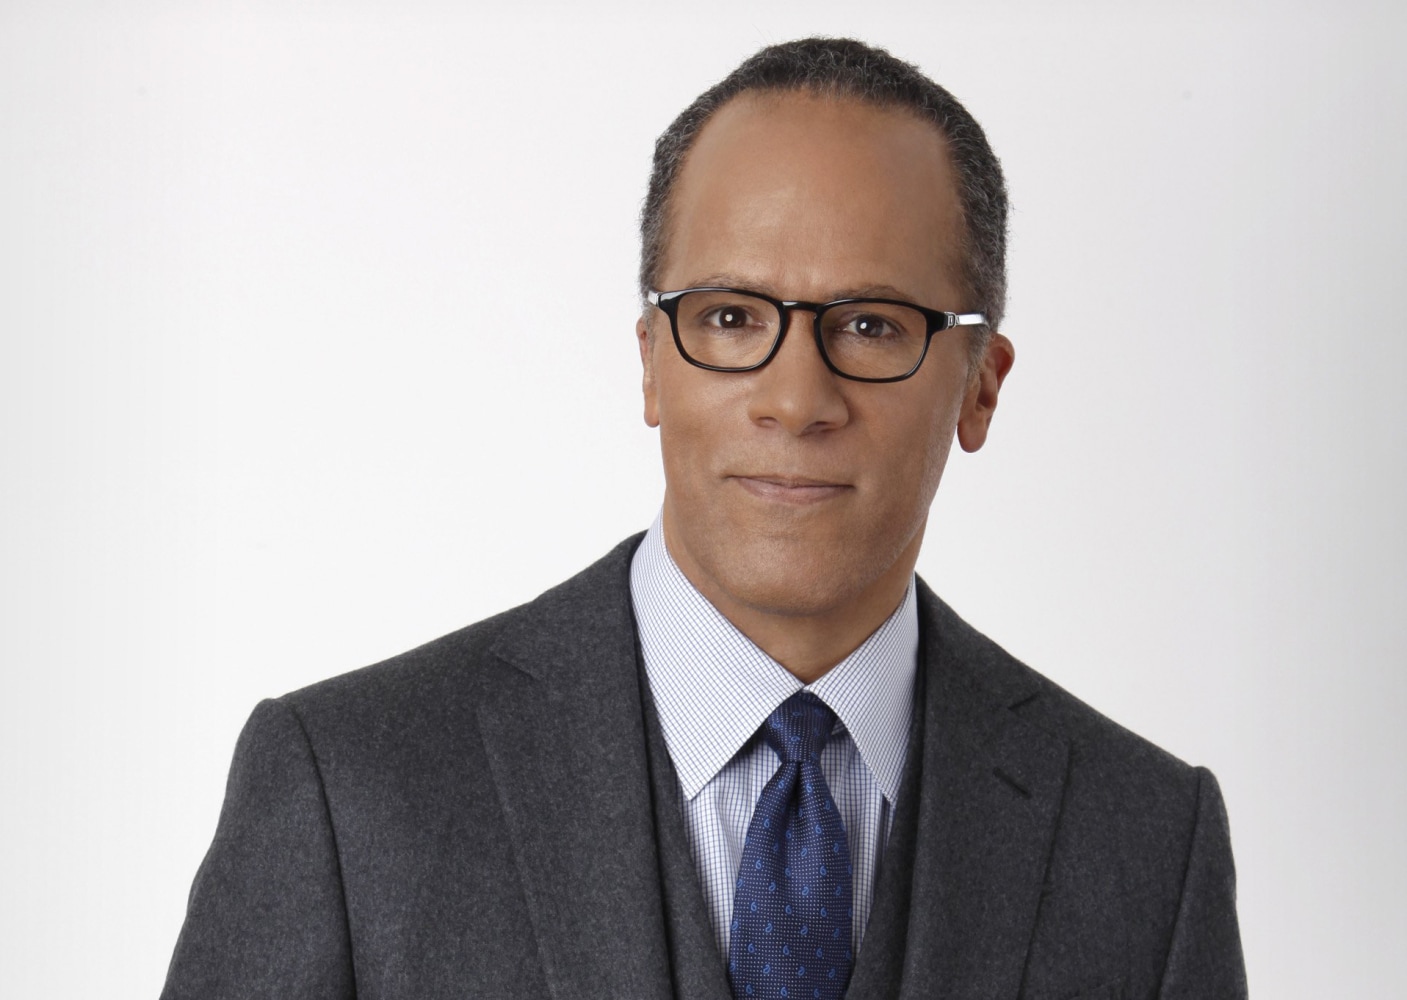 The 63-year old son of father (?) and mother(?) Lester Holt in 2022 photo. Lester Holt earned a  million dollar salary - leaving the net worth at 12 million in 2022